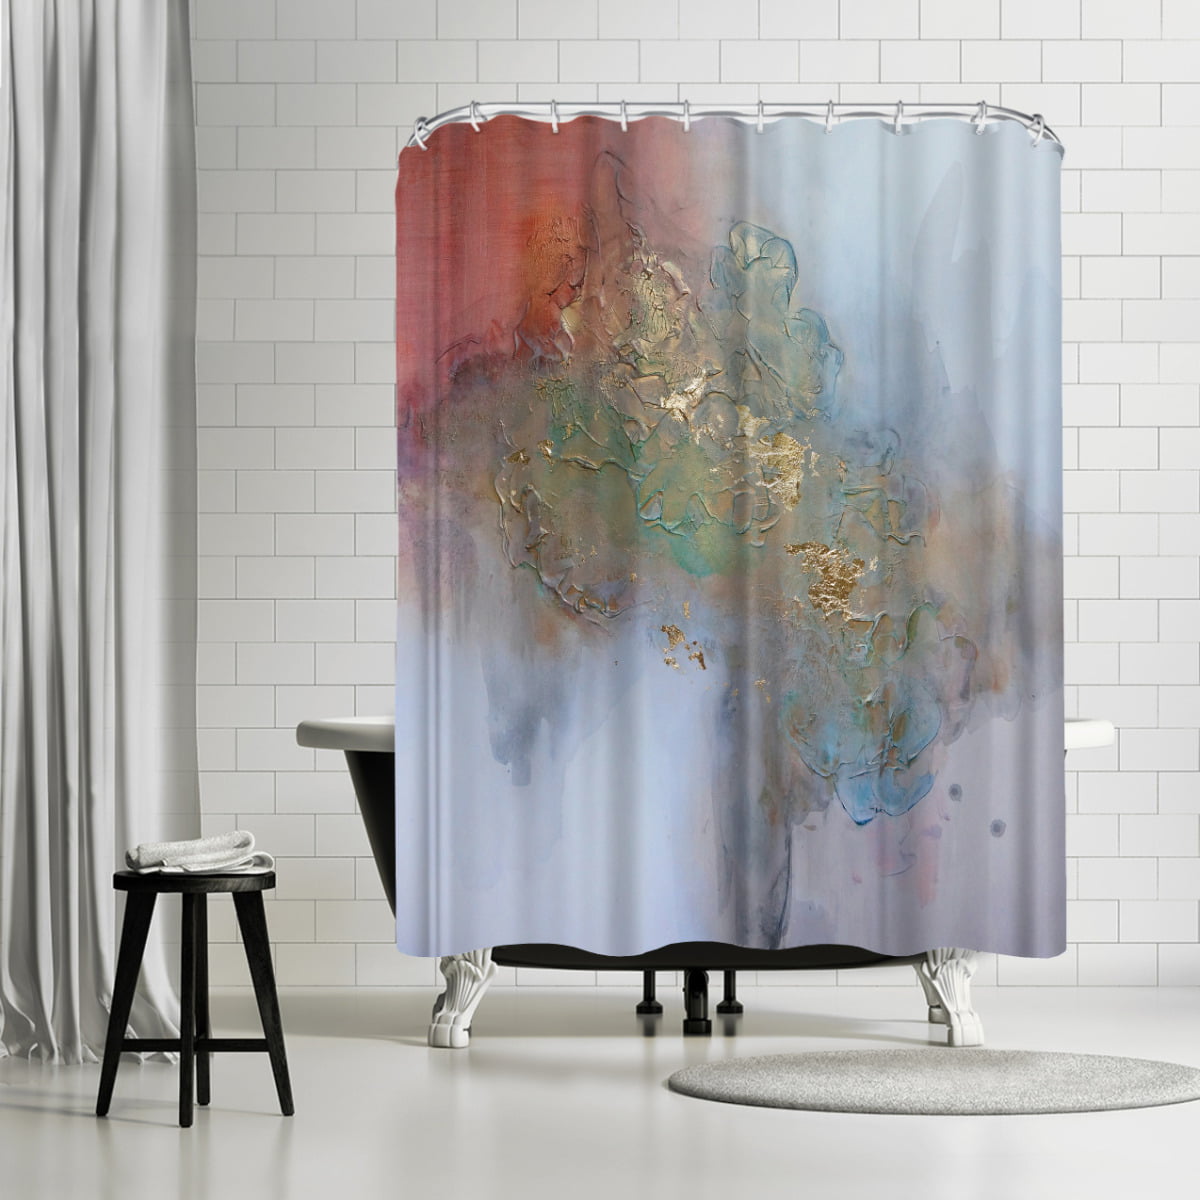 Christine Olmstead Shower Curtain, East Urban Home Shower Curtains